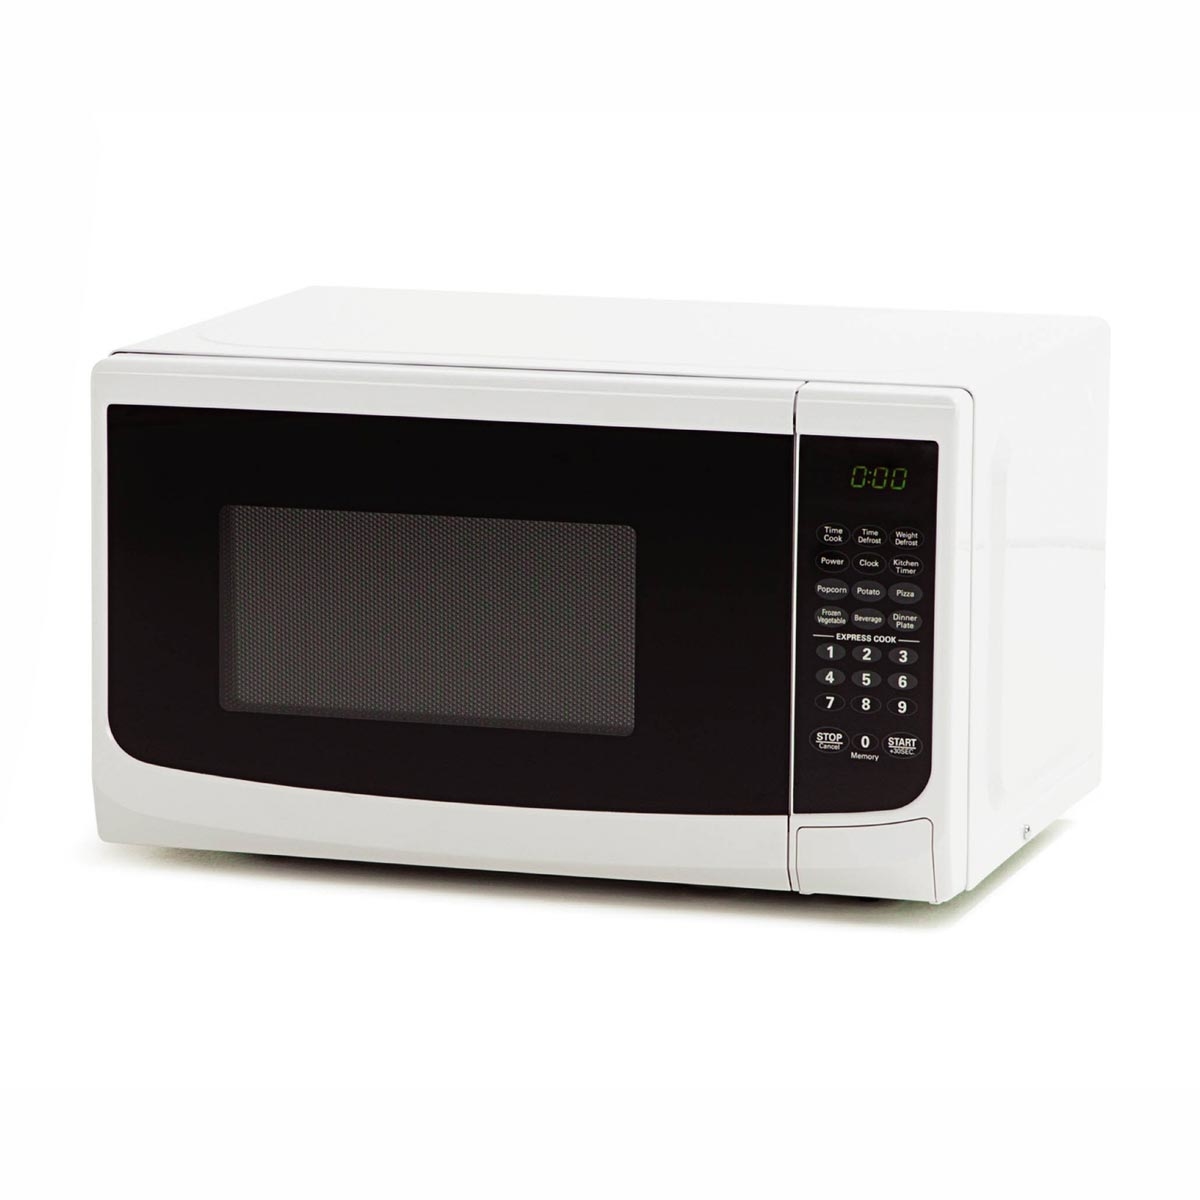 What are standard microwave sizes?